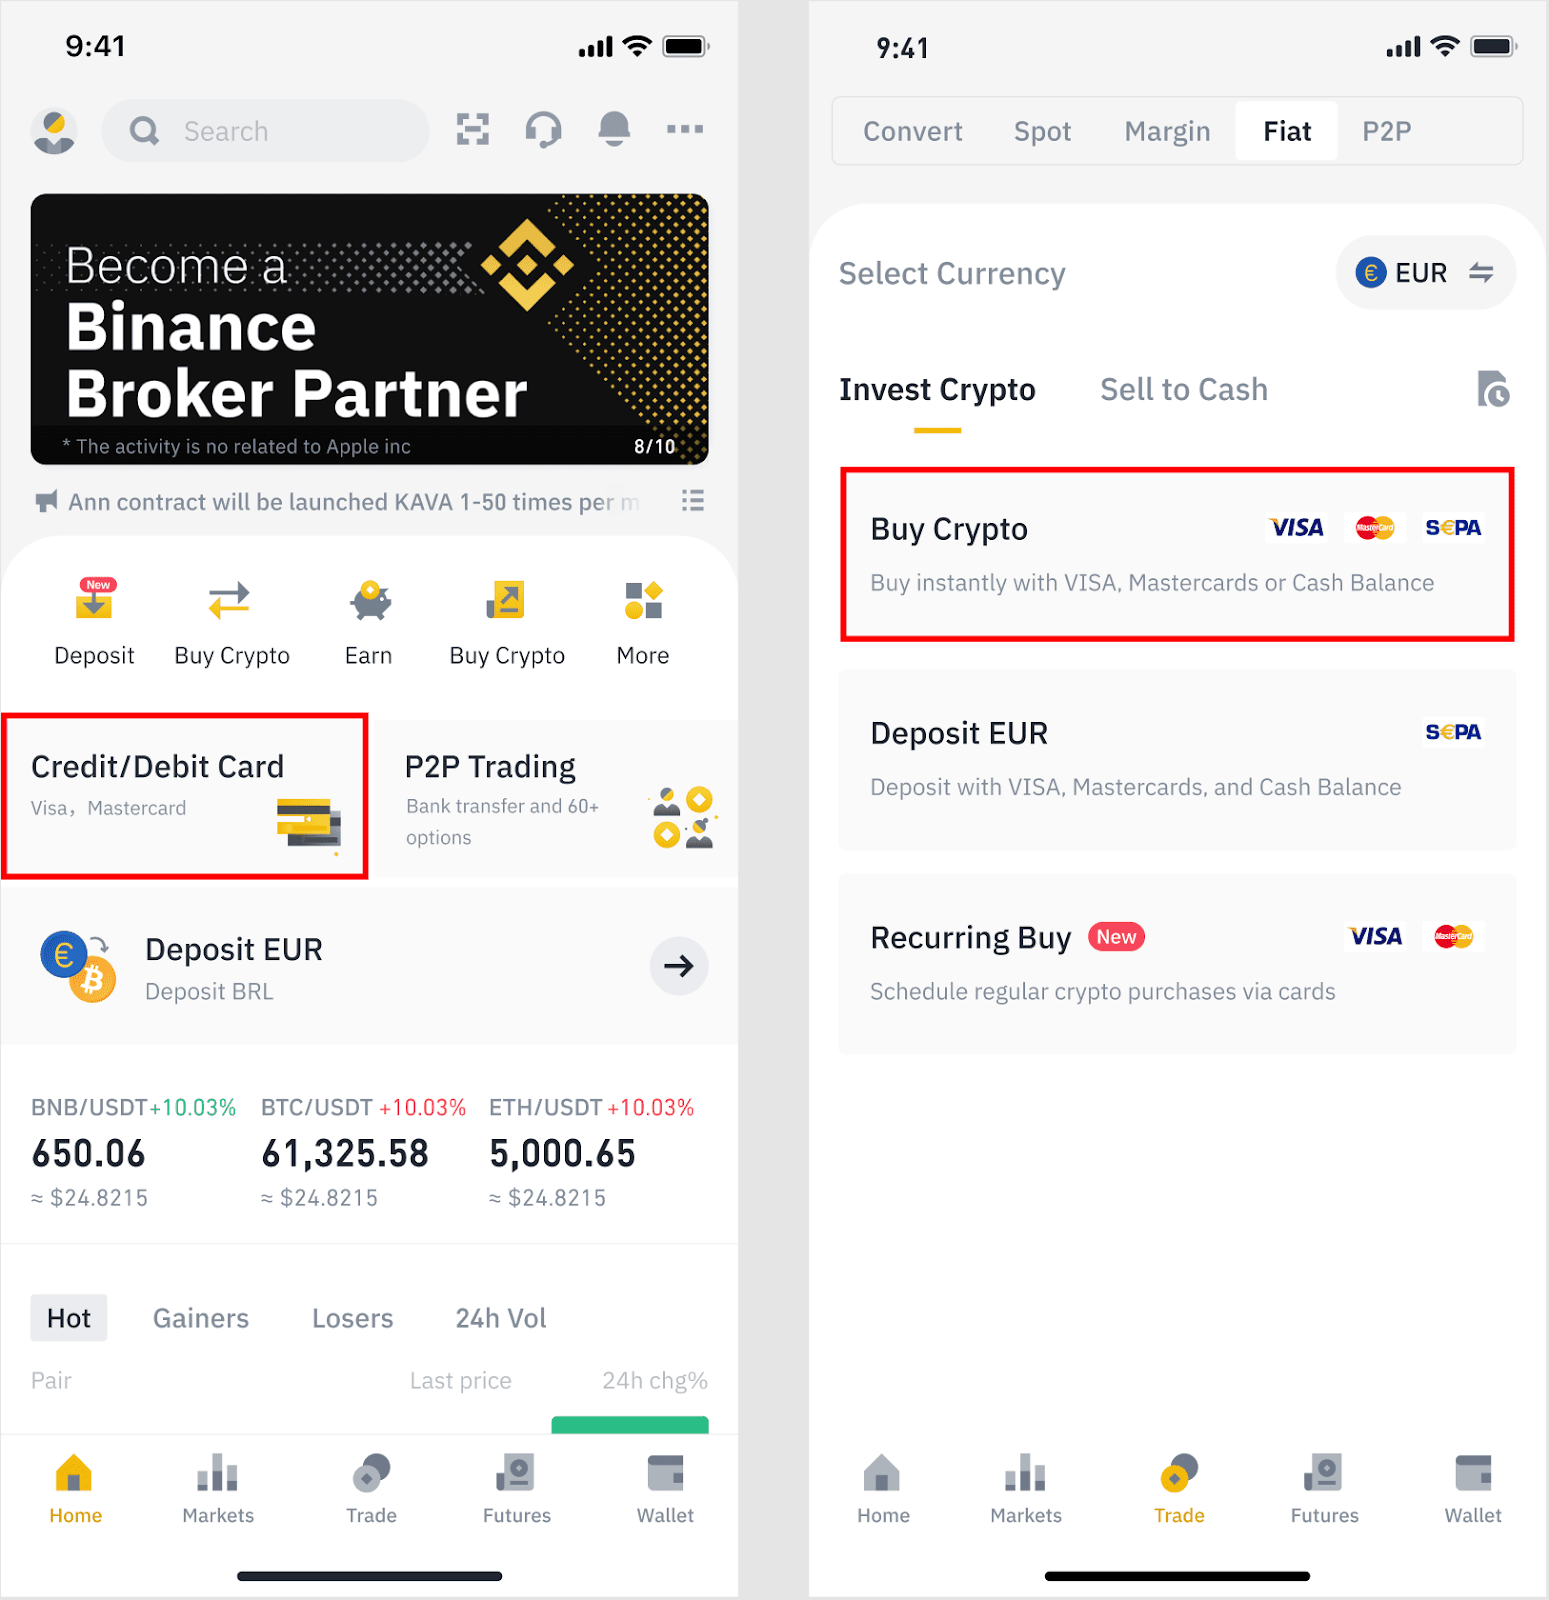 You Can Now Buy Ripple's XRP on Binance by Directly Adding Your Visa Card